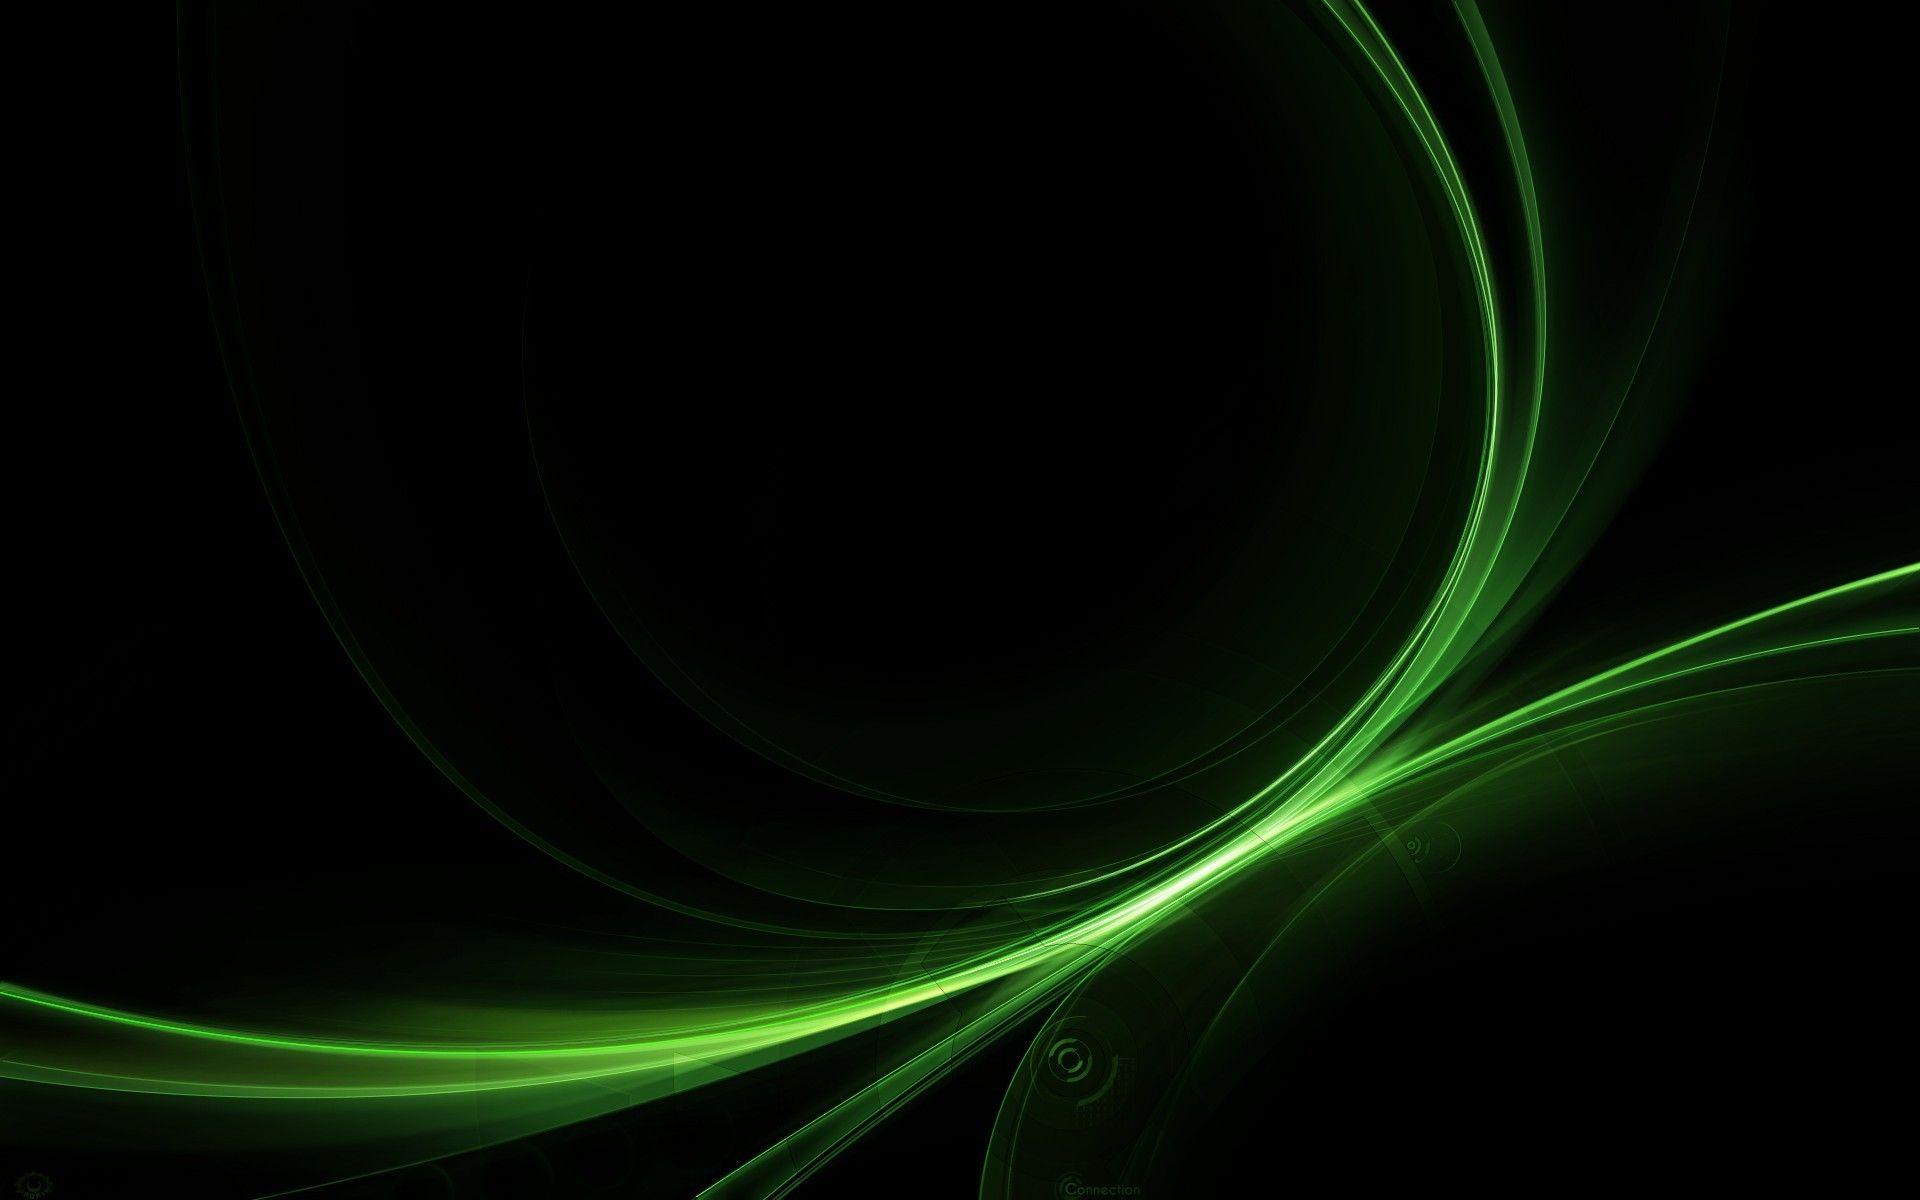 Black And Green Abstract Wallpapers - Wallpaper Cave.